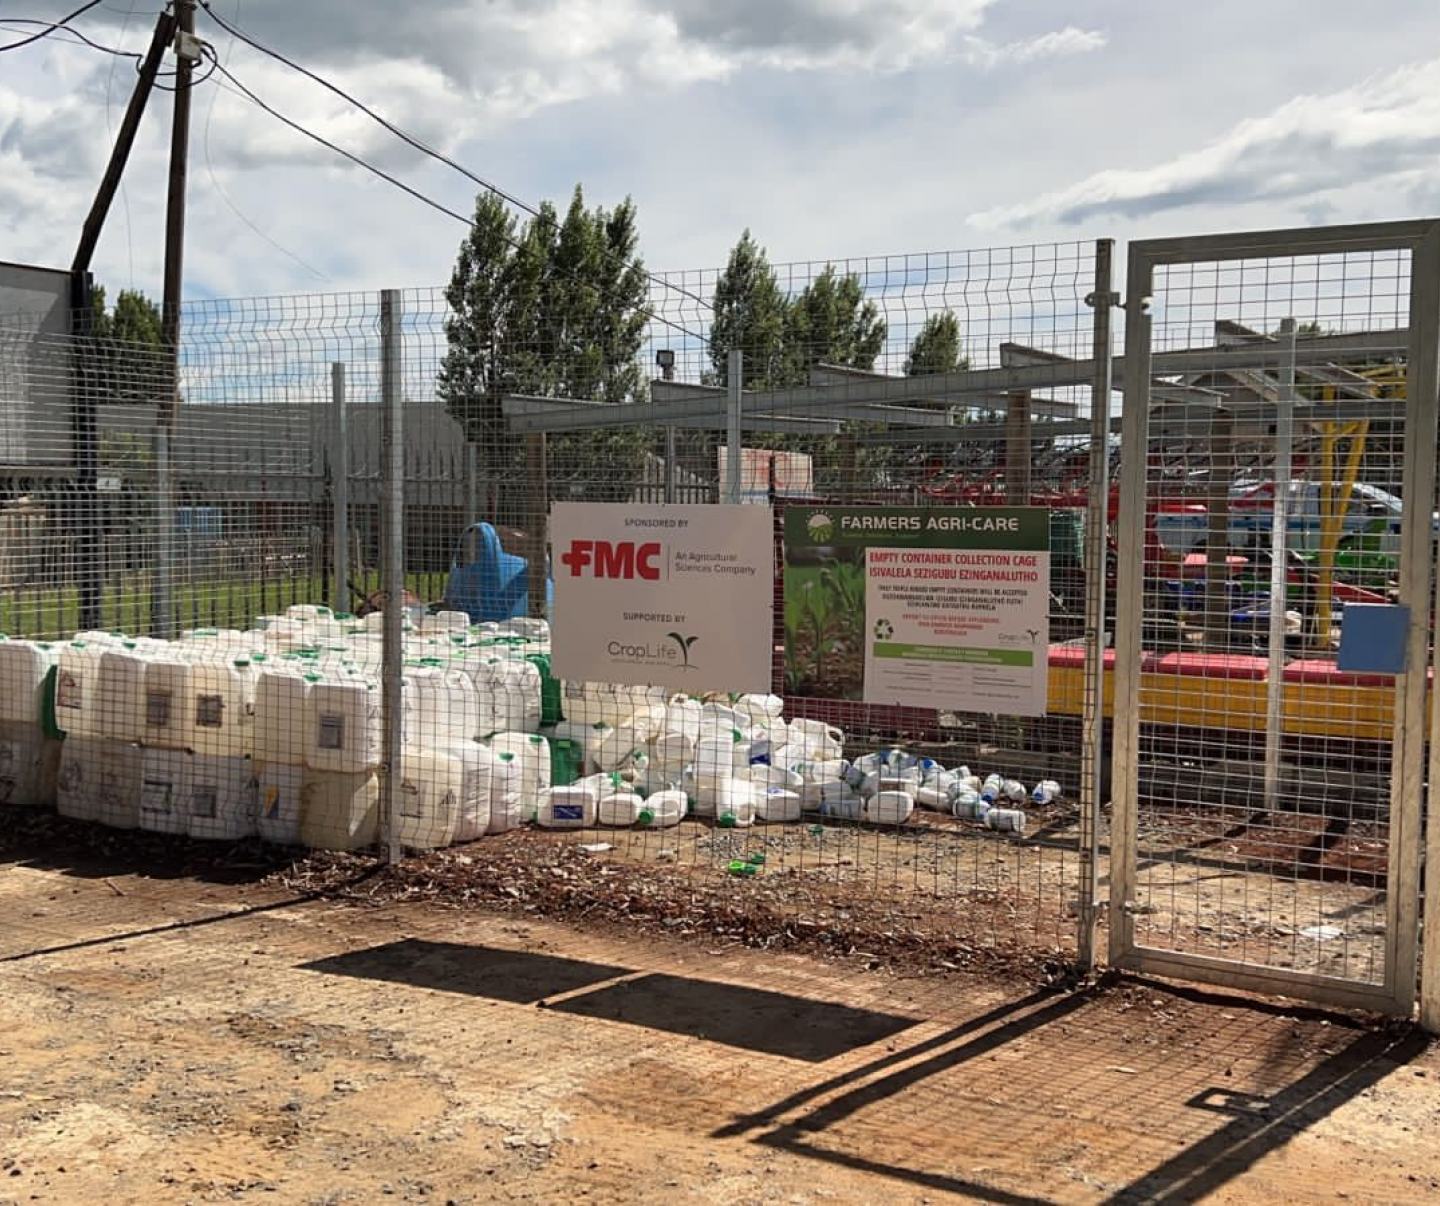 South Africa Sponsors Construction of Cages for Empty Agrochemical Containers Destined for Recycling